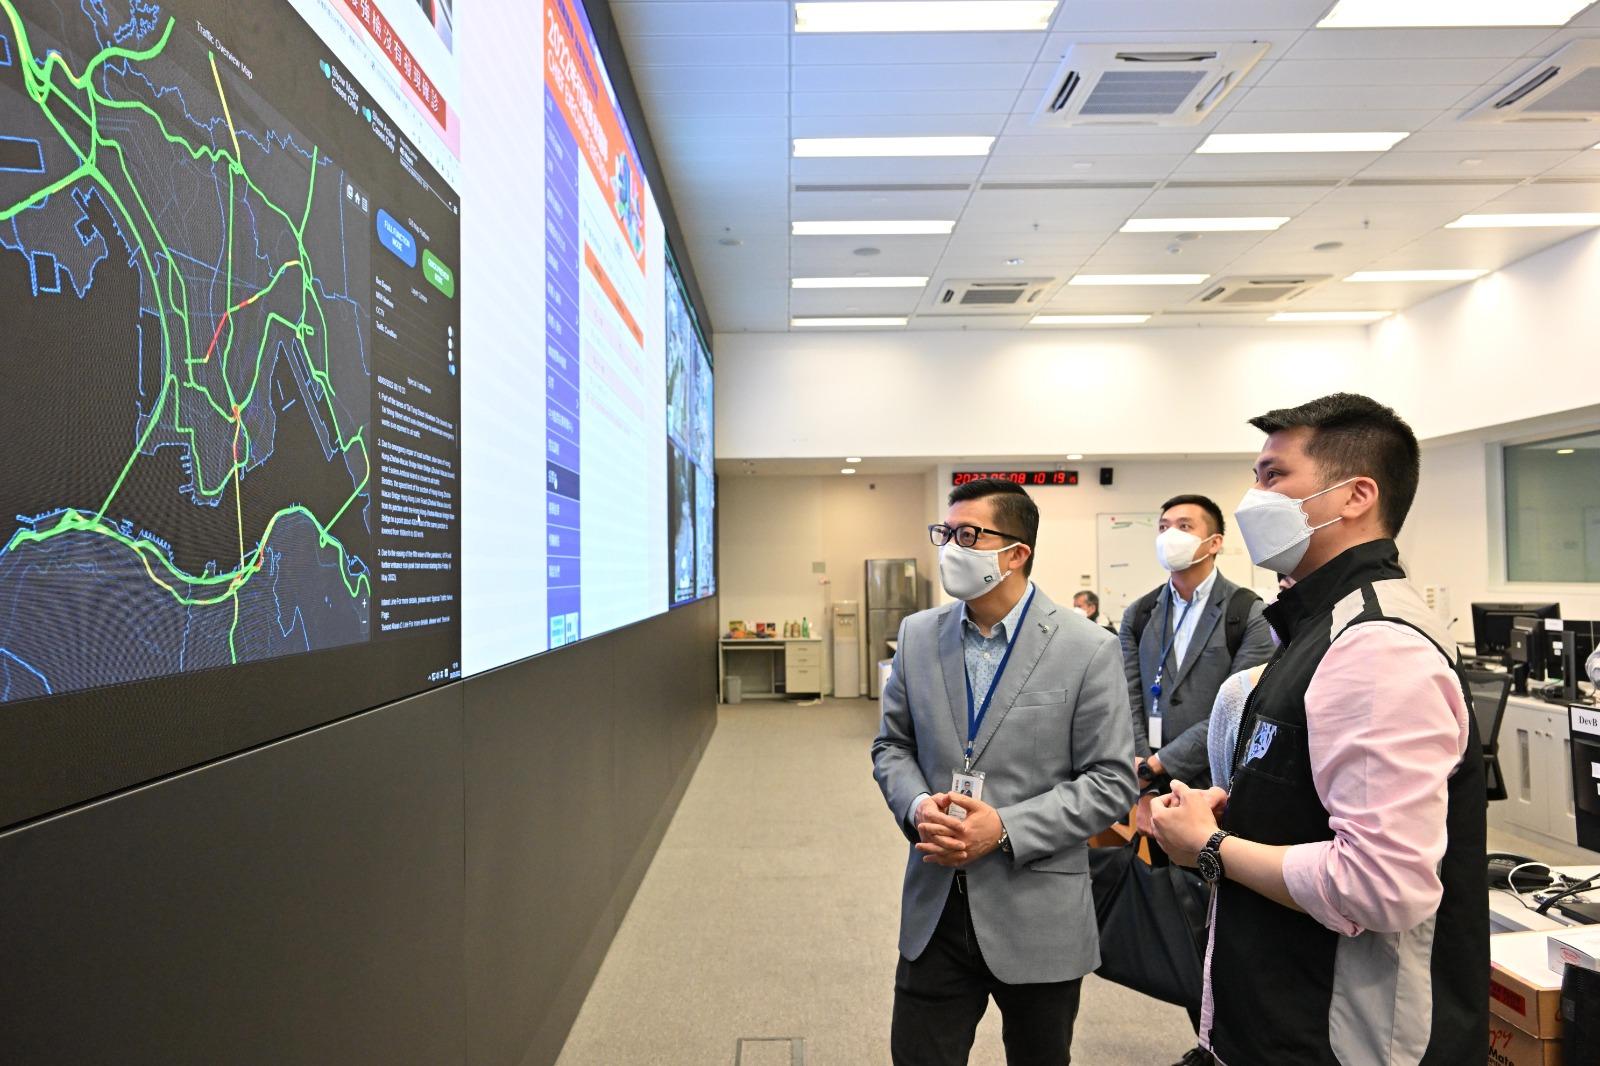 The Secretary for Security, Mr Tang Ping-keung, this morning (May 8) inspected the security arrangements in the vicinity of the Hong Kong Convention and Exhibition Centre to ensure the 2022 Chief Executive Election be conducted in a safe and orderly manner. Photo shows Mr Tang (left) inspecting the operation of the Emergency Monitoring and Support Centre of the Security Bureau activated today and being briefed by the personnel on the latest situation of the polling day and relevant contingency plans.